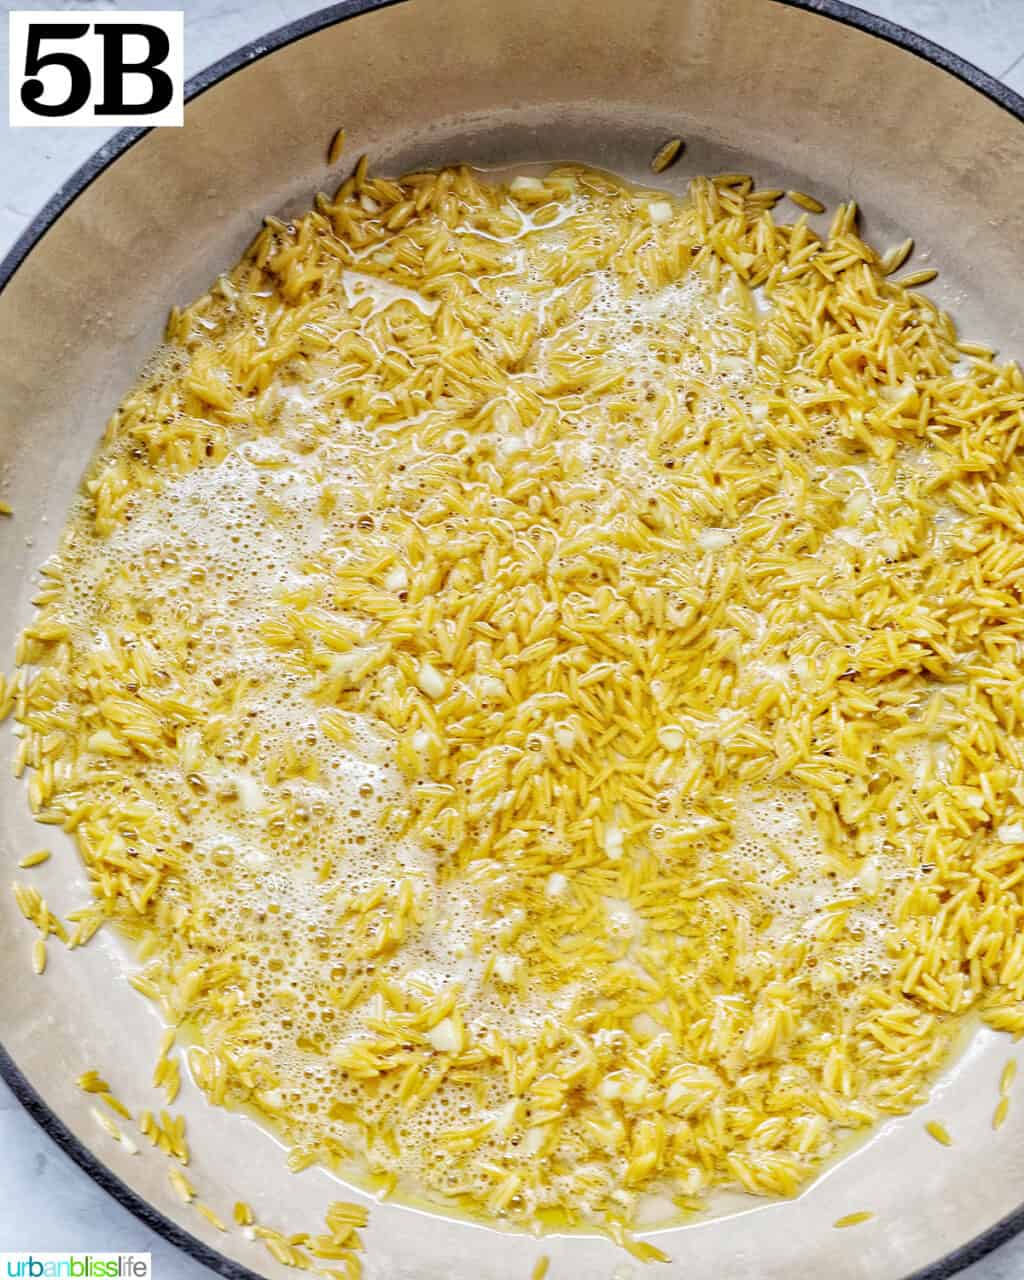 orzo cooking in white wine.